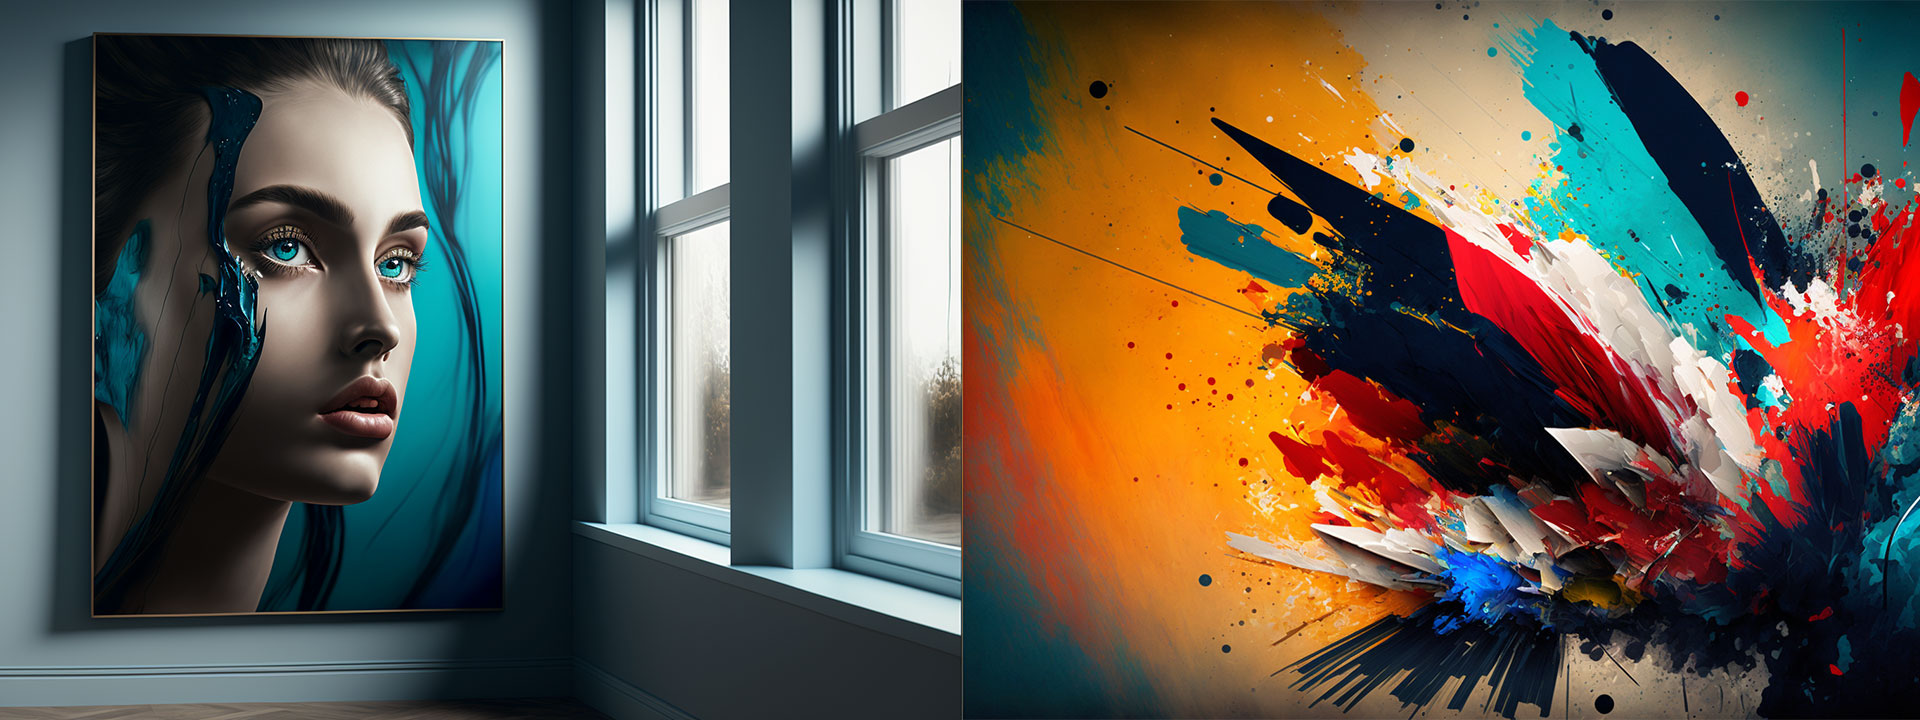 Abstract Expressionism vs. Contemporary Art